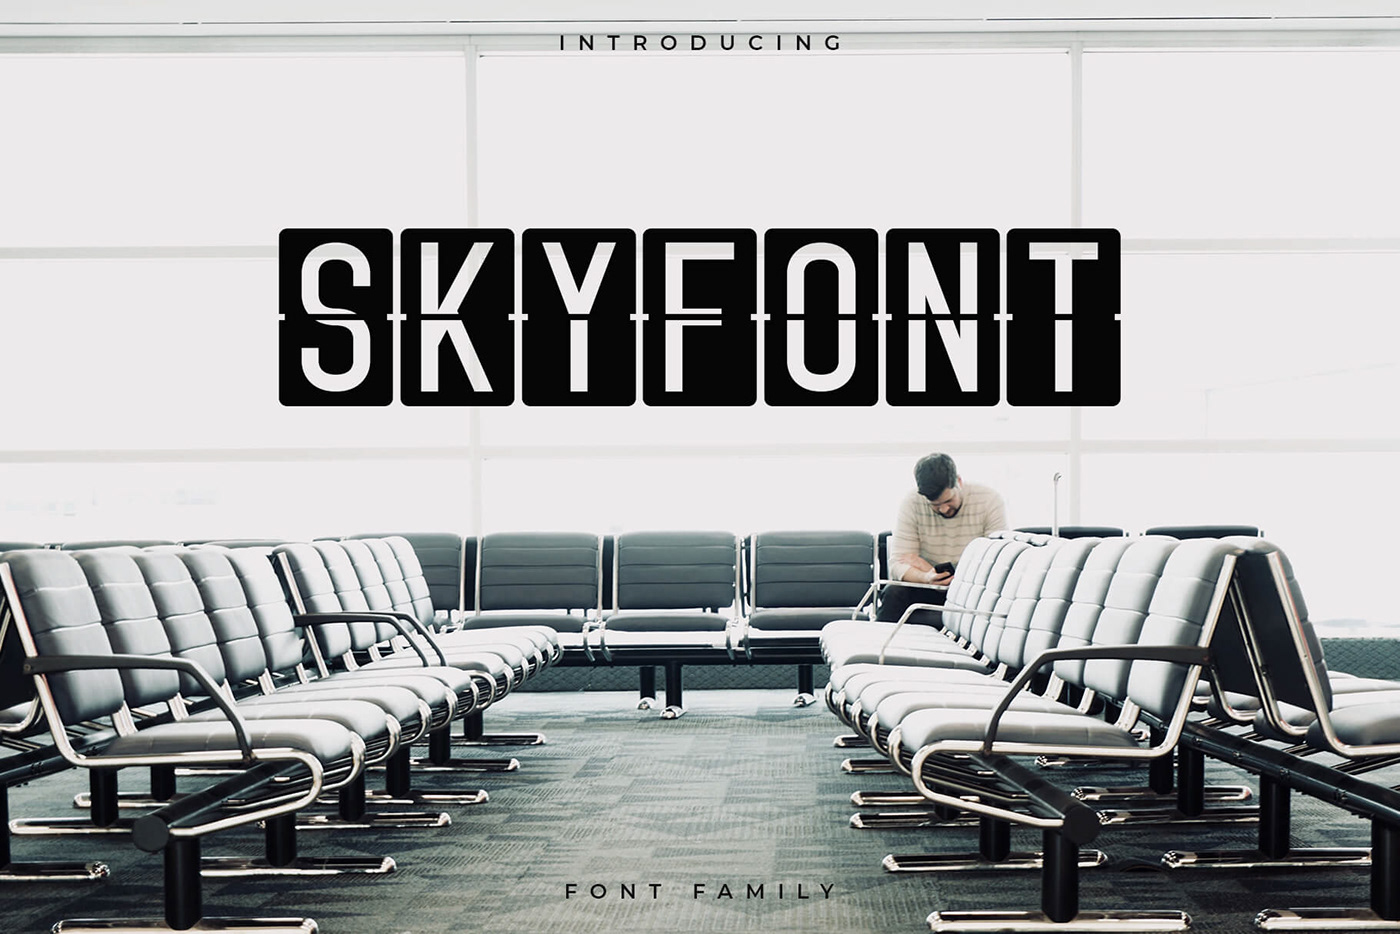 font Free font font family free freebies SKY airport airplane free typeface Font Freebie